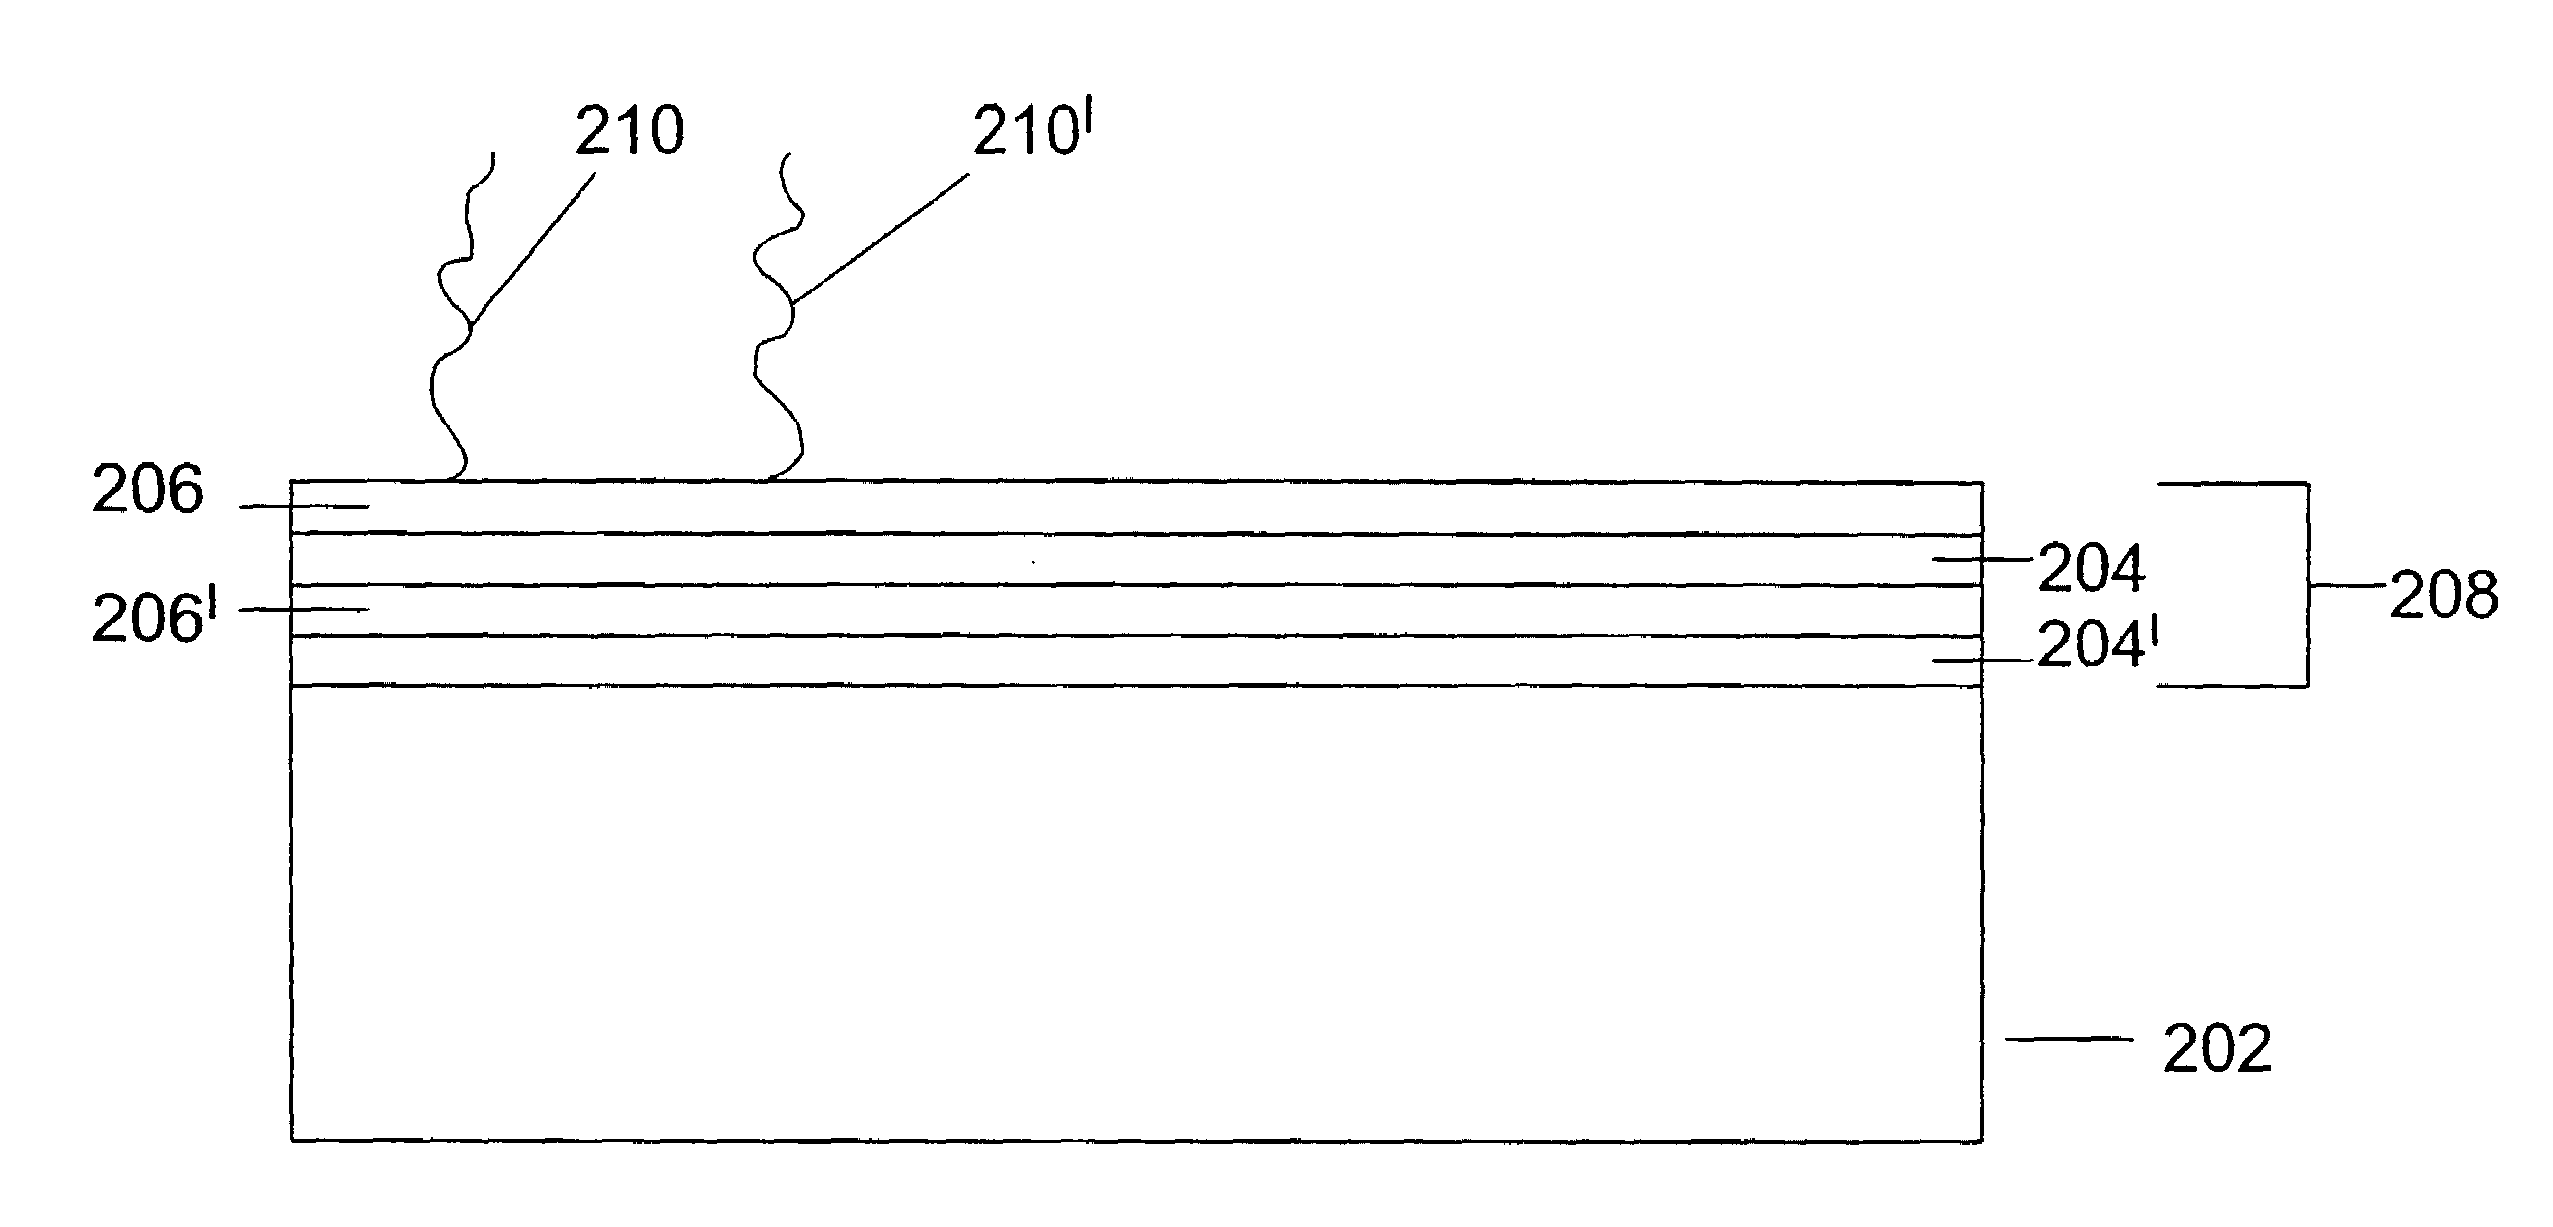 Methods and apparatuses for analyzing polynucleotide sequences